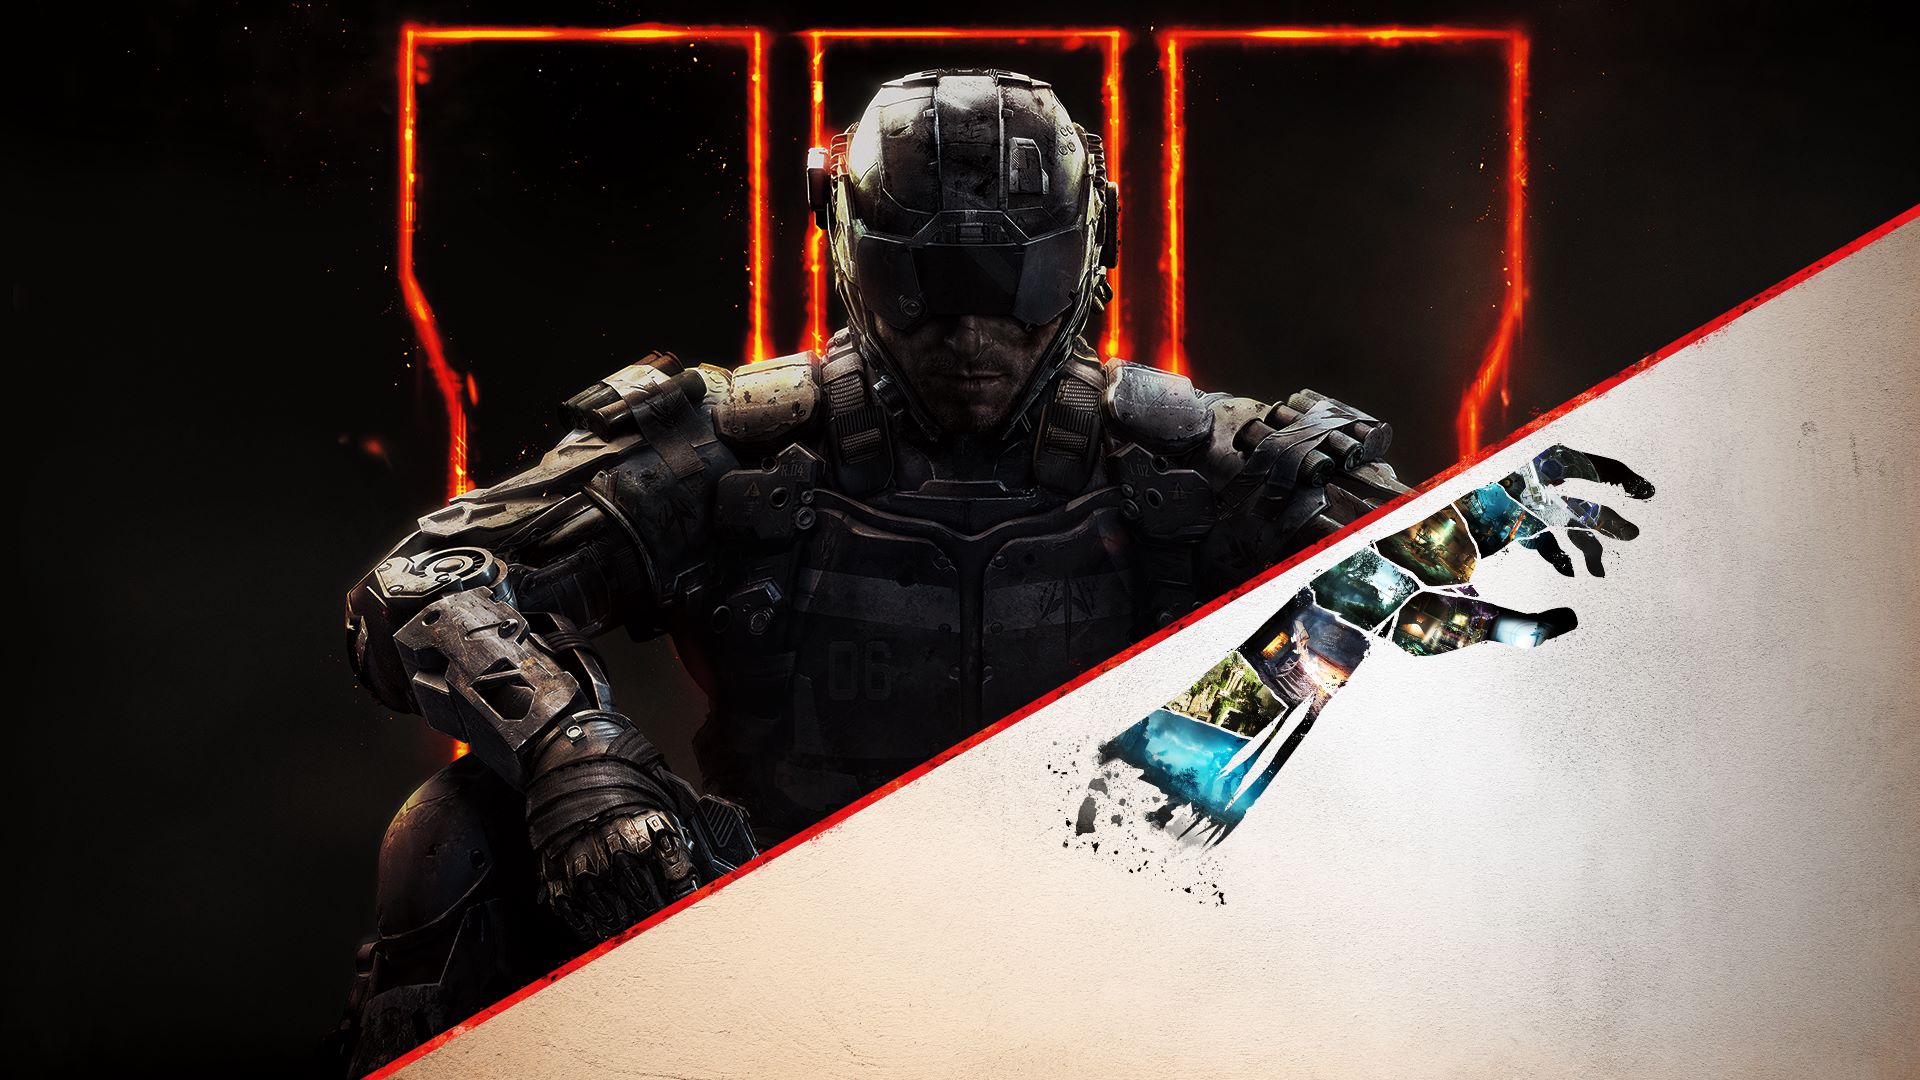 black ops 3 zombie chronicles edition digital download